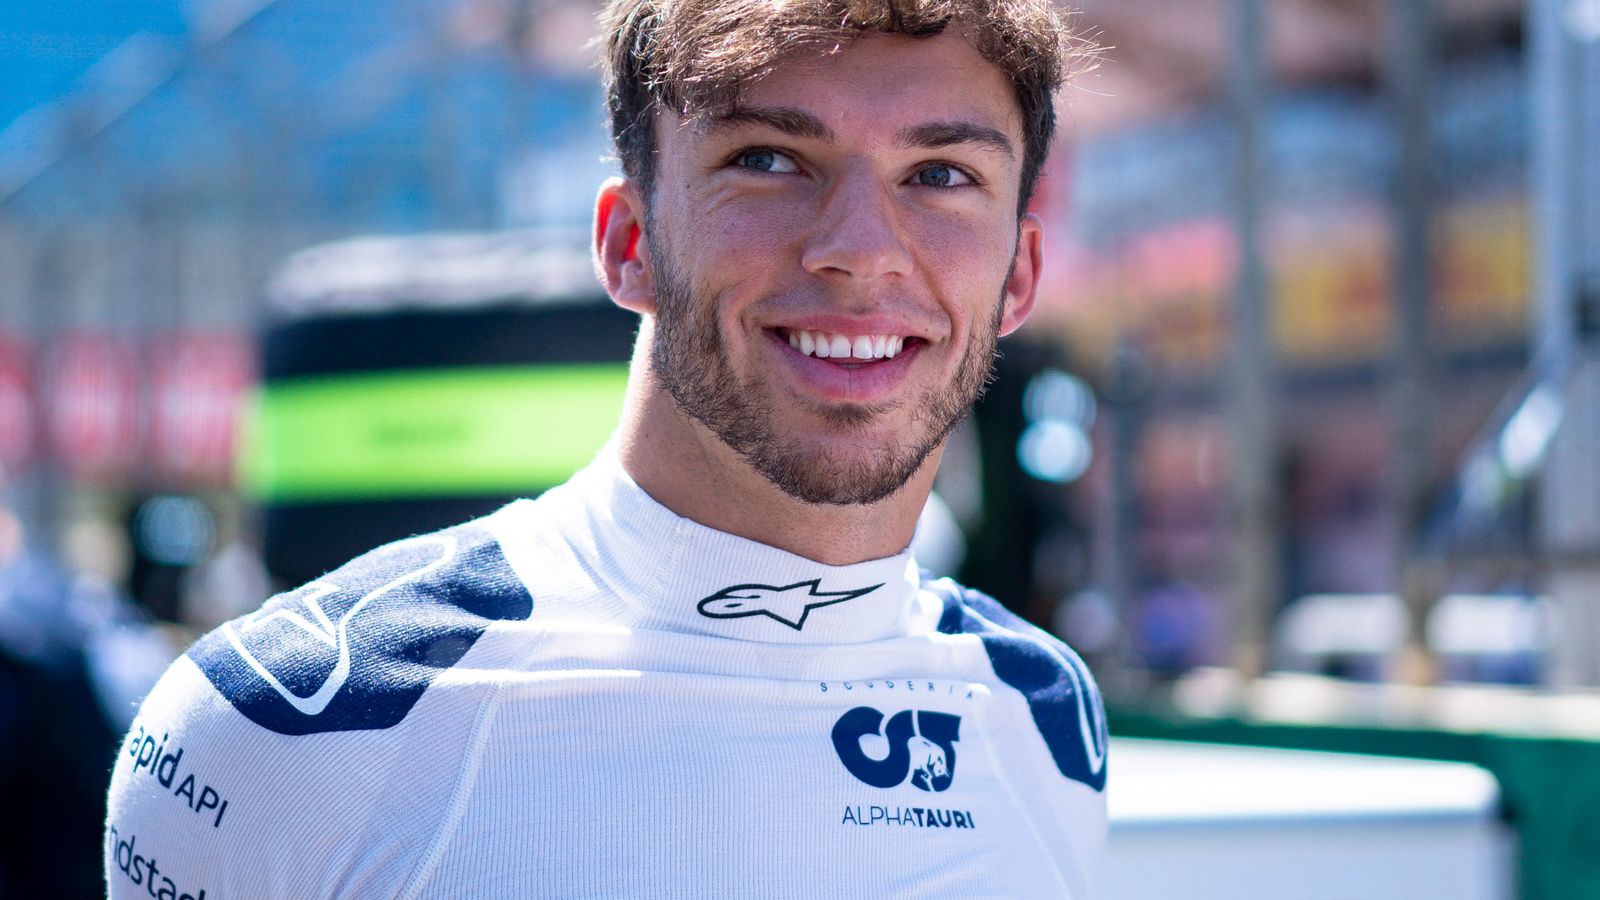 Pierre Gasly staying at AlphaTauri for 2023 Formula 1 season with Red Bull timing 'not right'